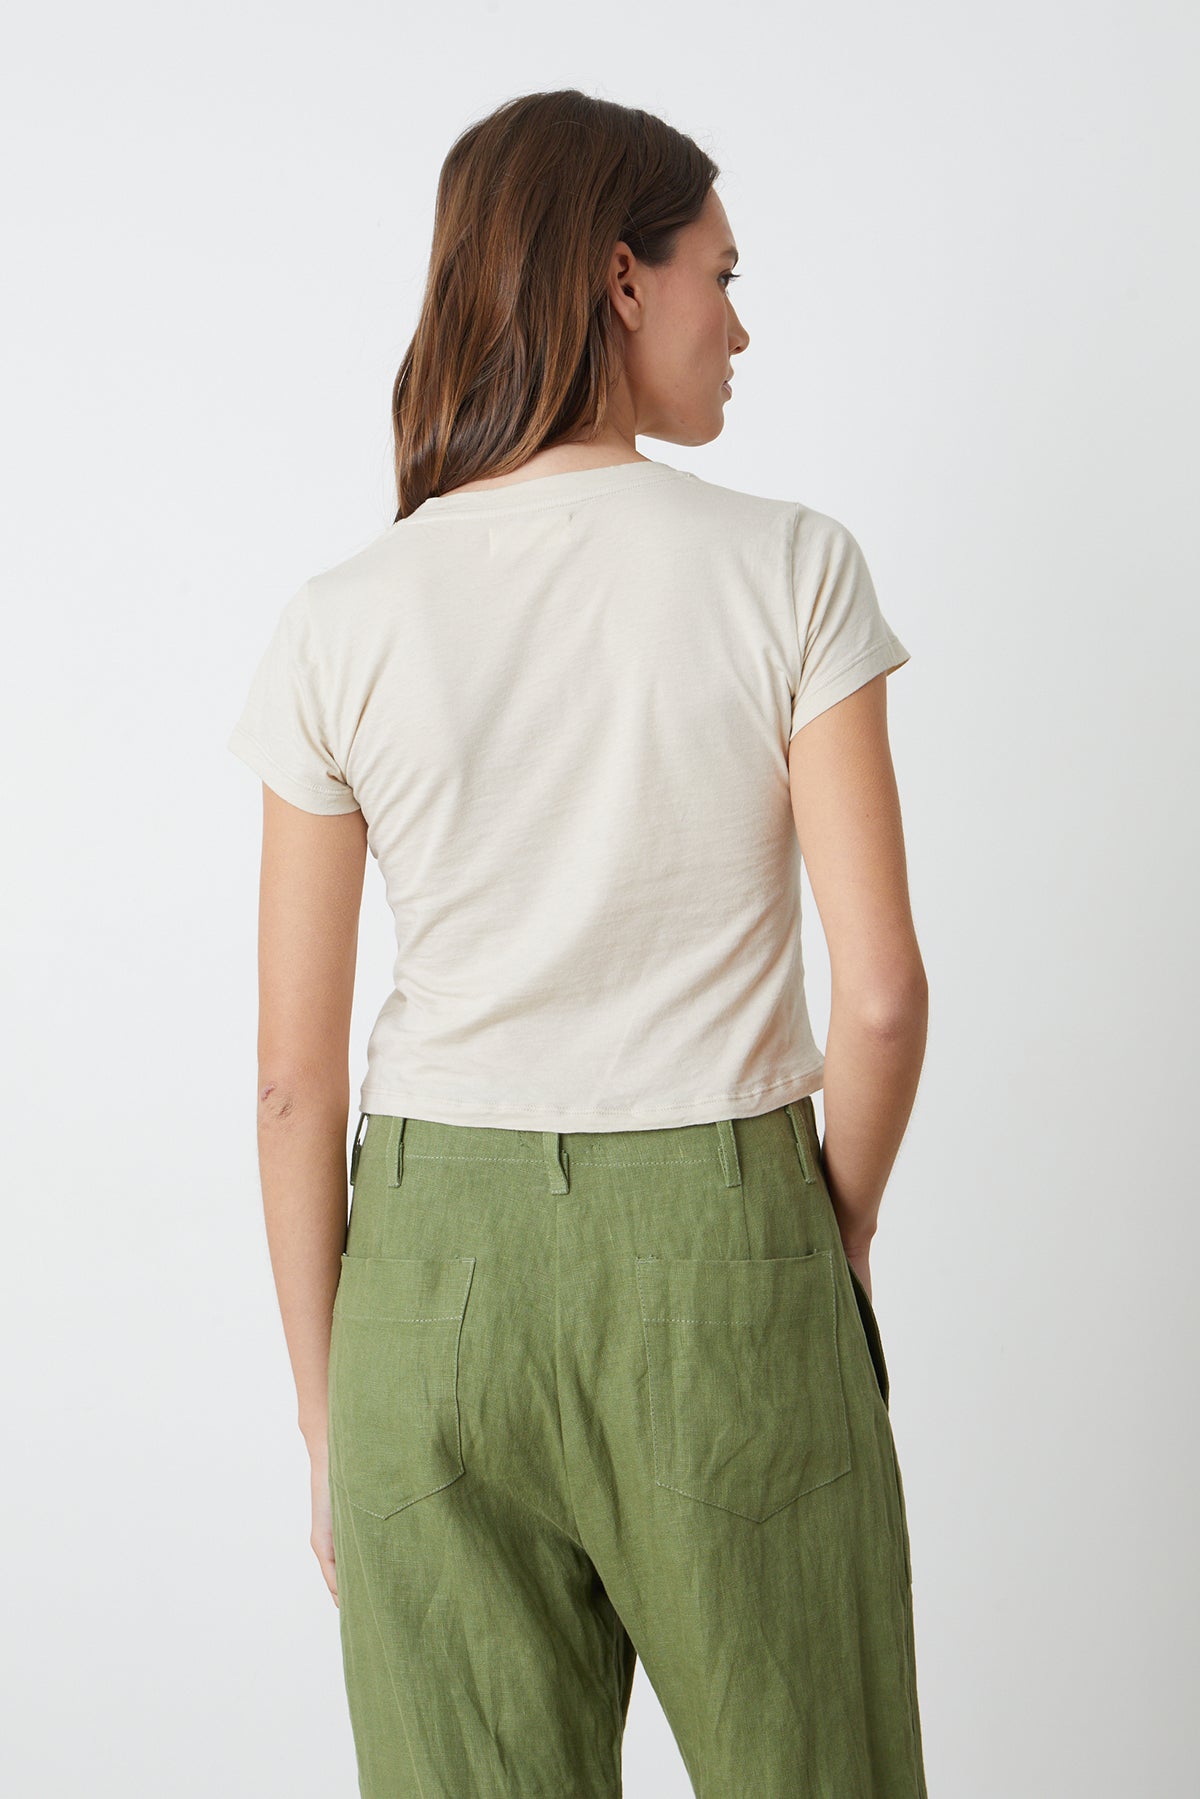   Nina Tee in bisque with Dru pant in basil back 